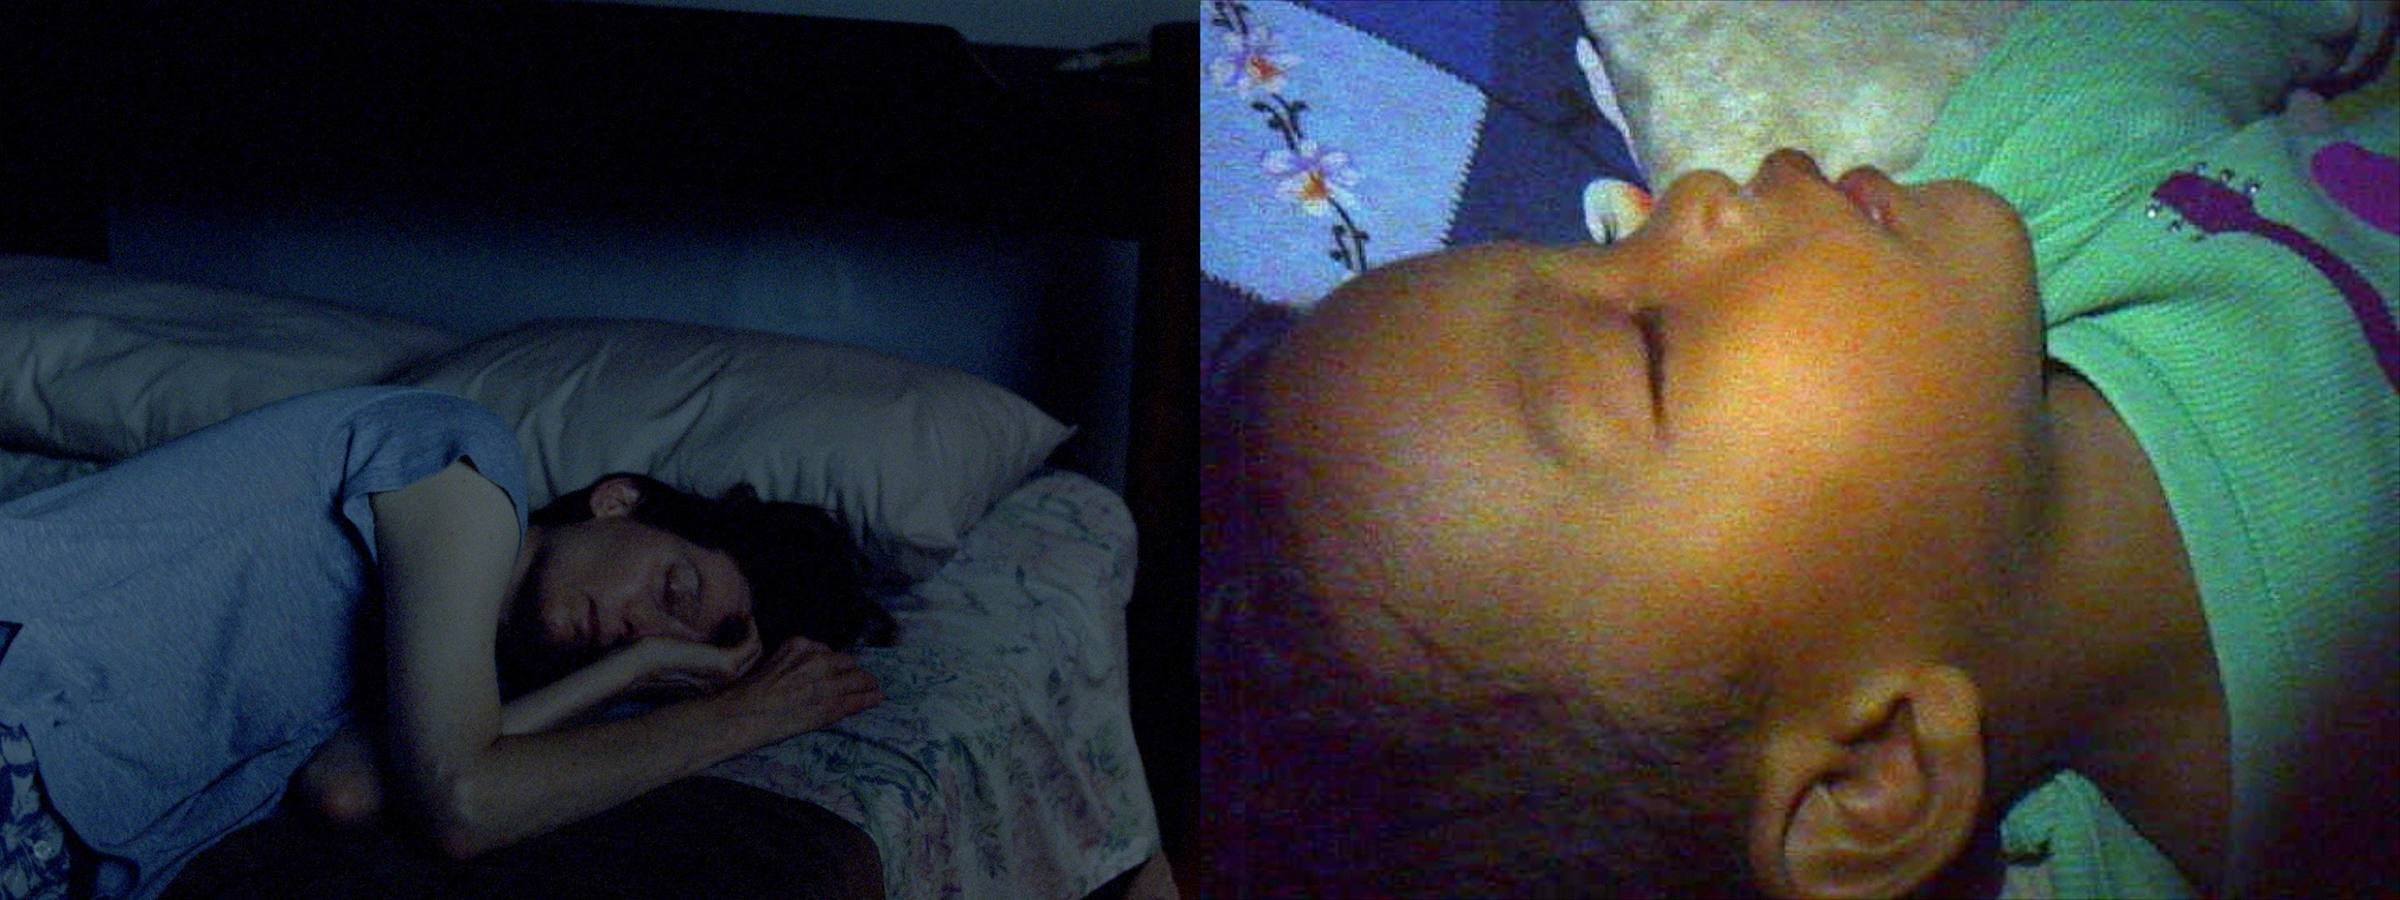 A split screen projection. On the left we can see a person sleeping, on the right we can see a child sleeping